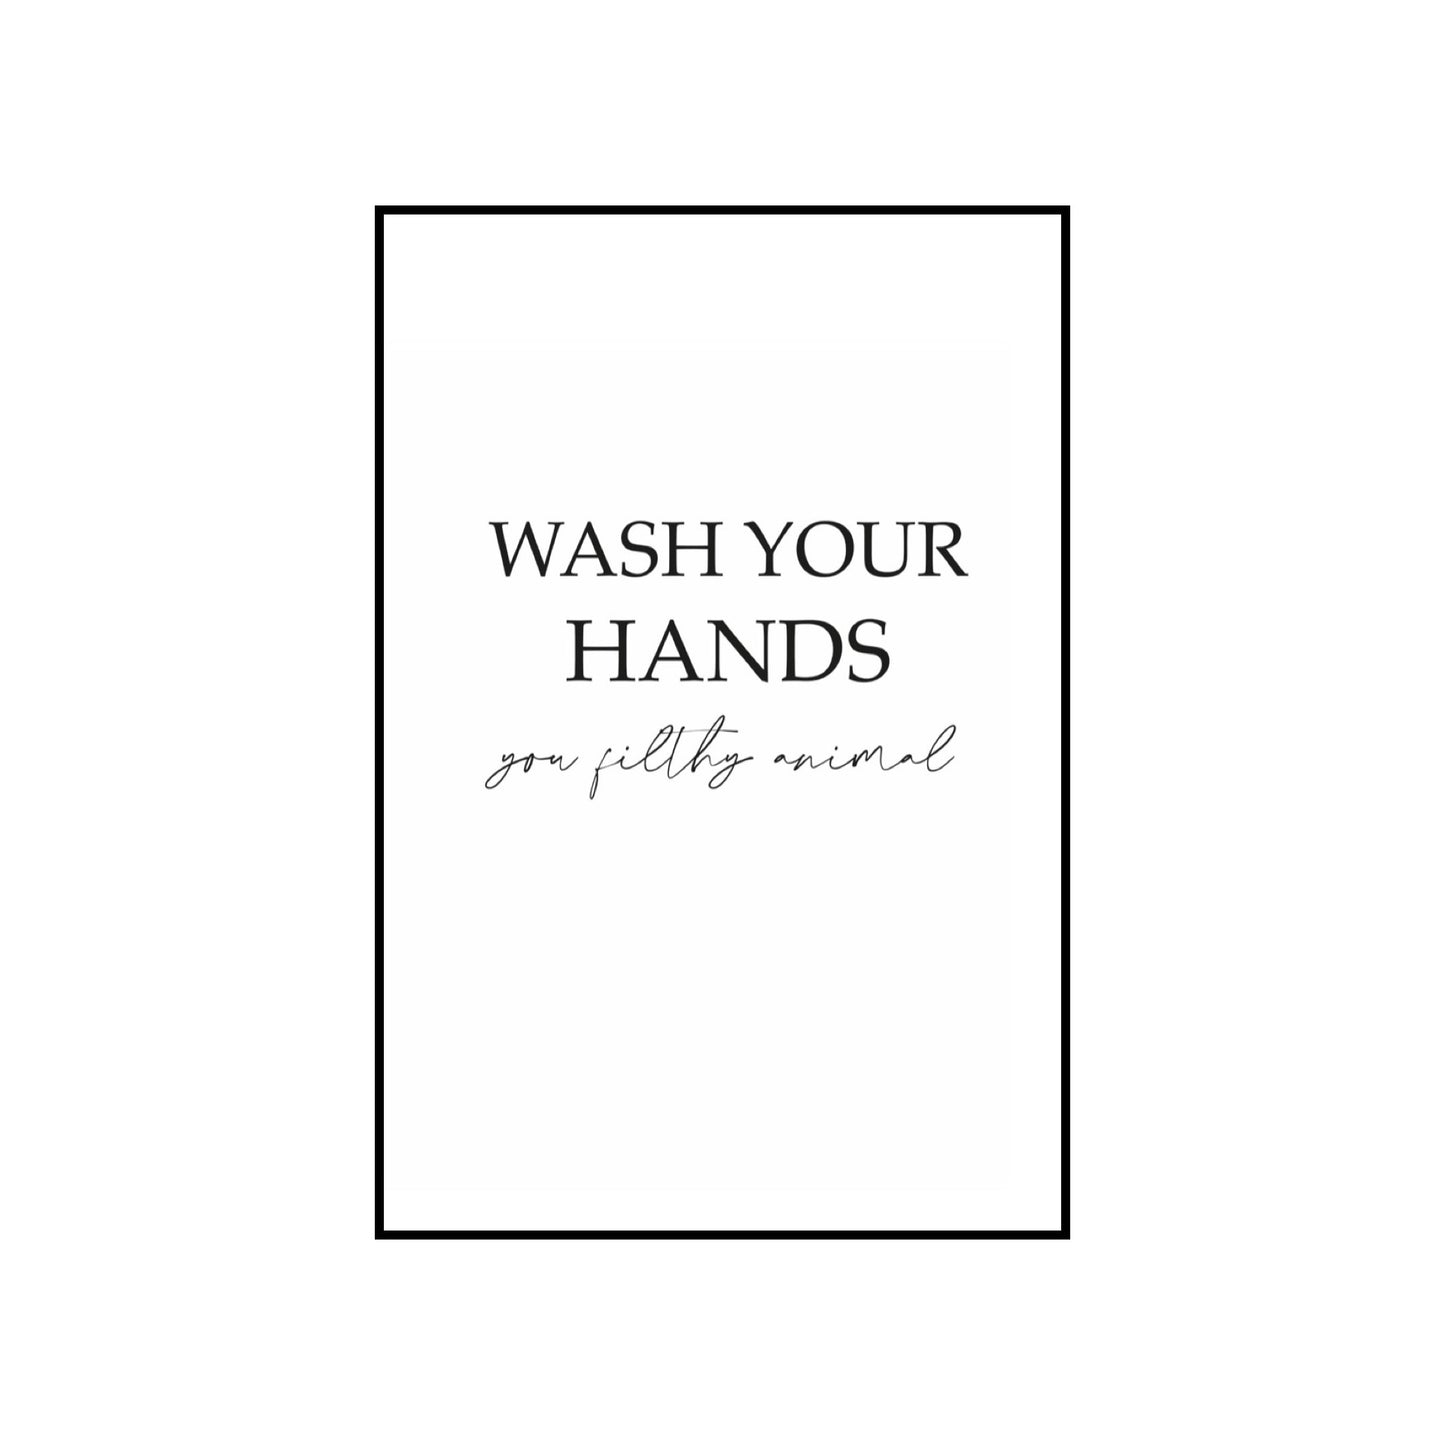 Wash your hands - THE WALL STYLIST